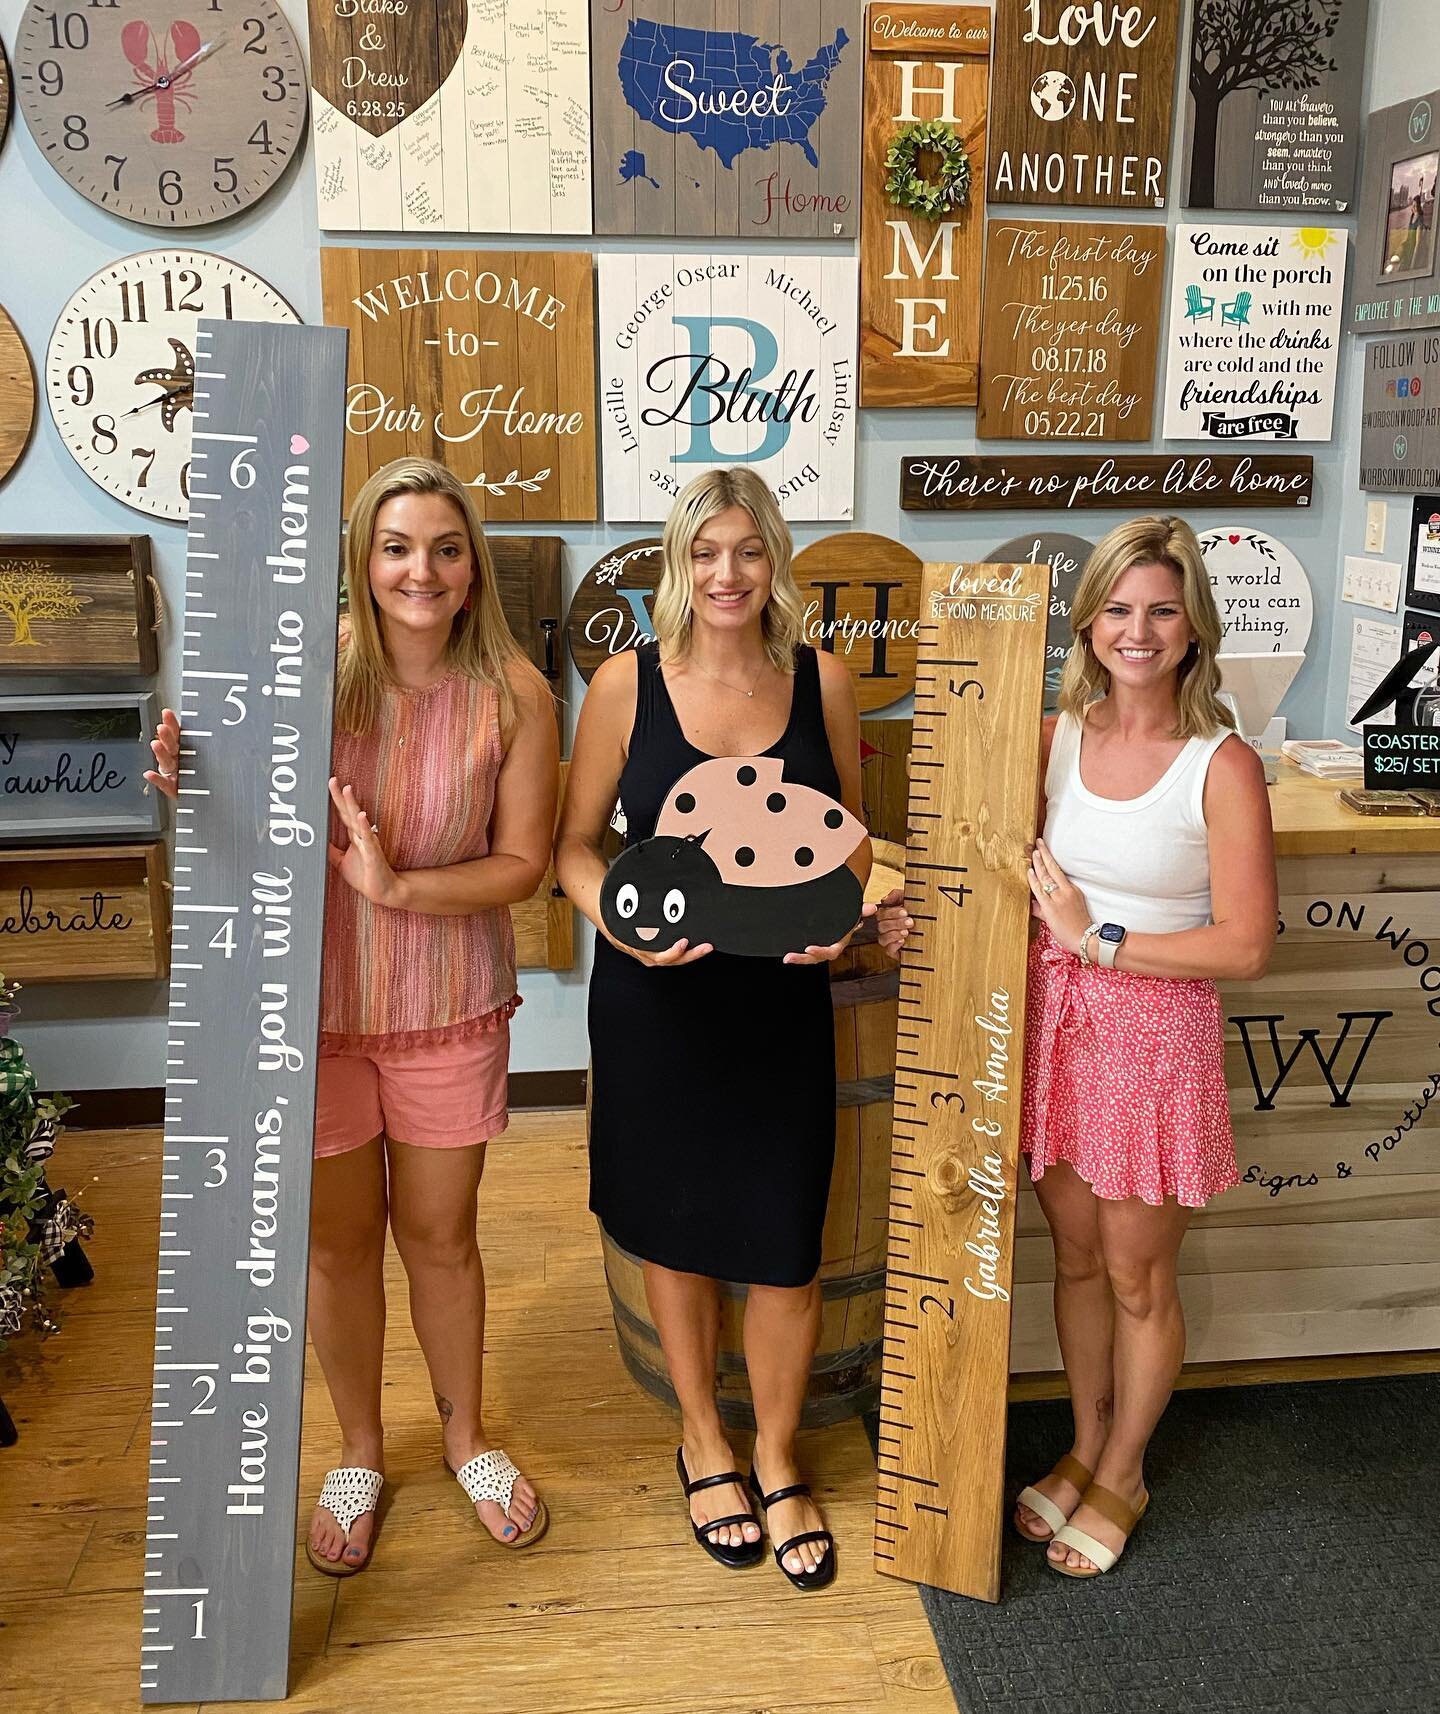 Words on Wood workshops make the perfect night out! Thank you all! ✨

Sign up for a workshop with your friends and order your project at wordsonwood.com 

-
-
#wordsonwood #wordsonwoodus #wordsonwoodparty #wordsonwoodct #wallingfordct #ctactivities #